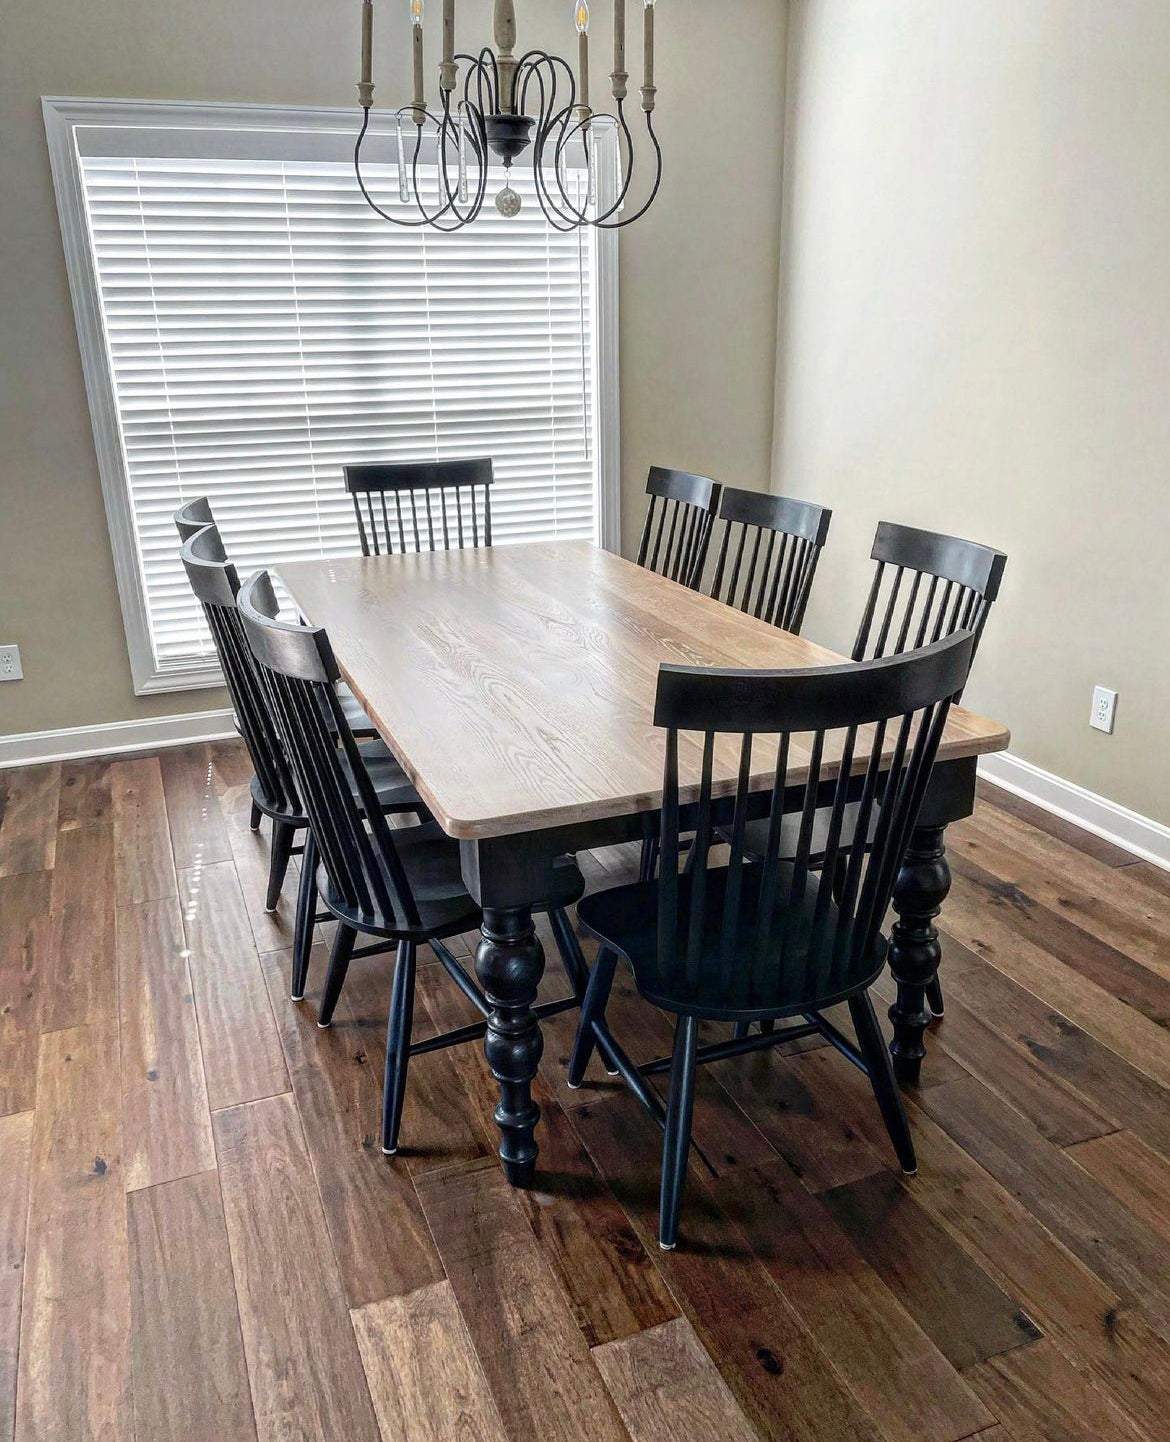 8' L x 42" White Oak Julia Dining Table with 8 New England Dining Chairs